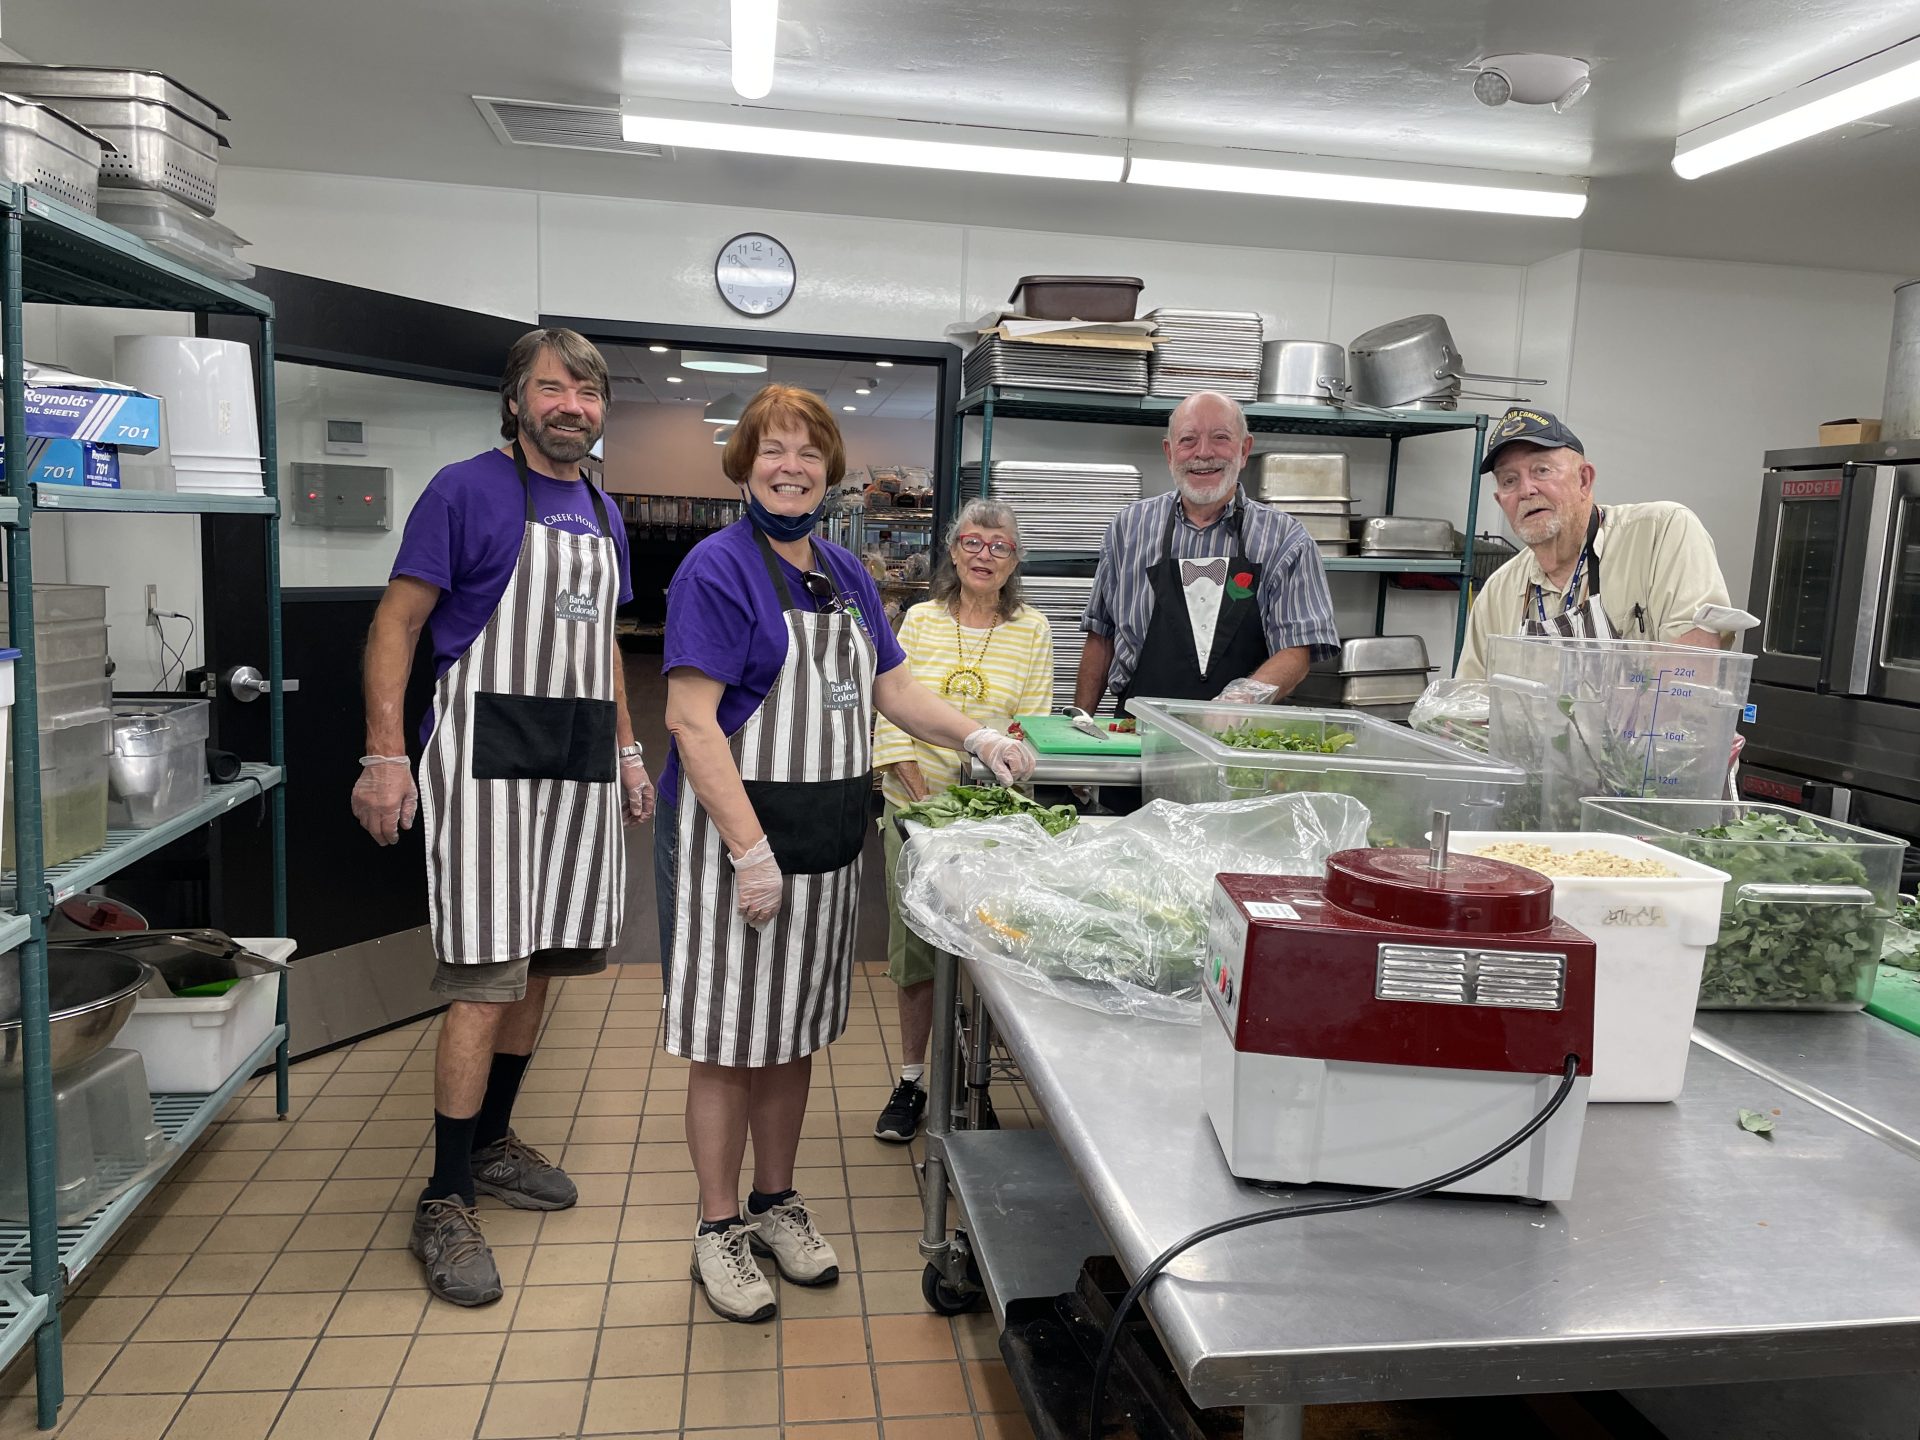 Manna Soup Kitchen – Details for volunteering on the 2nd Thursday of every month